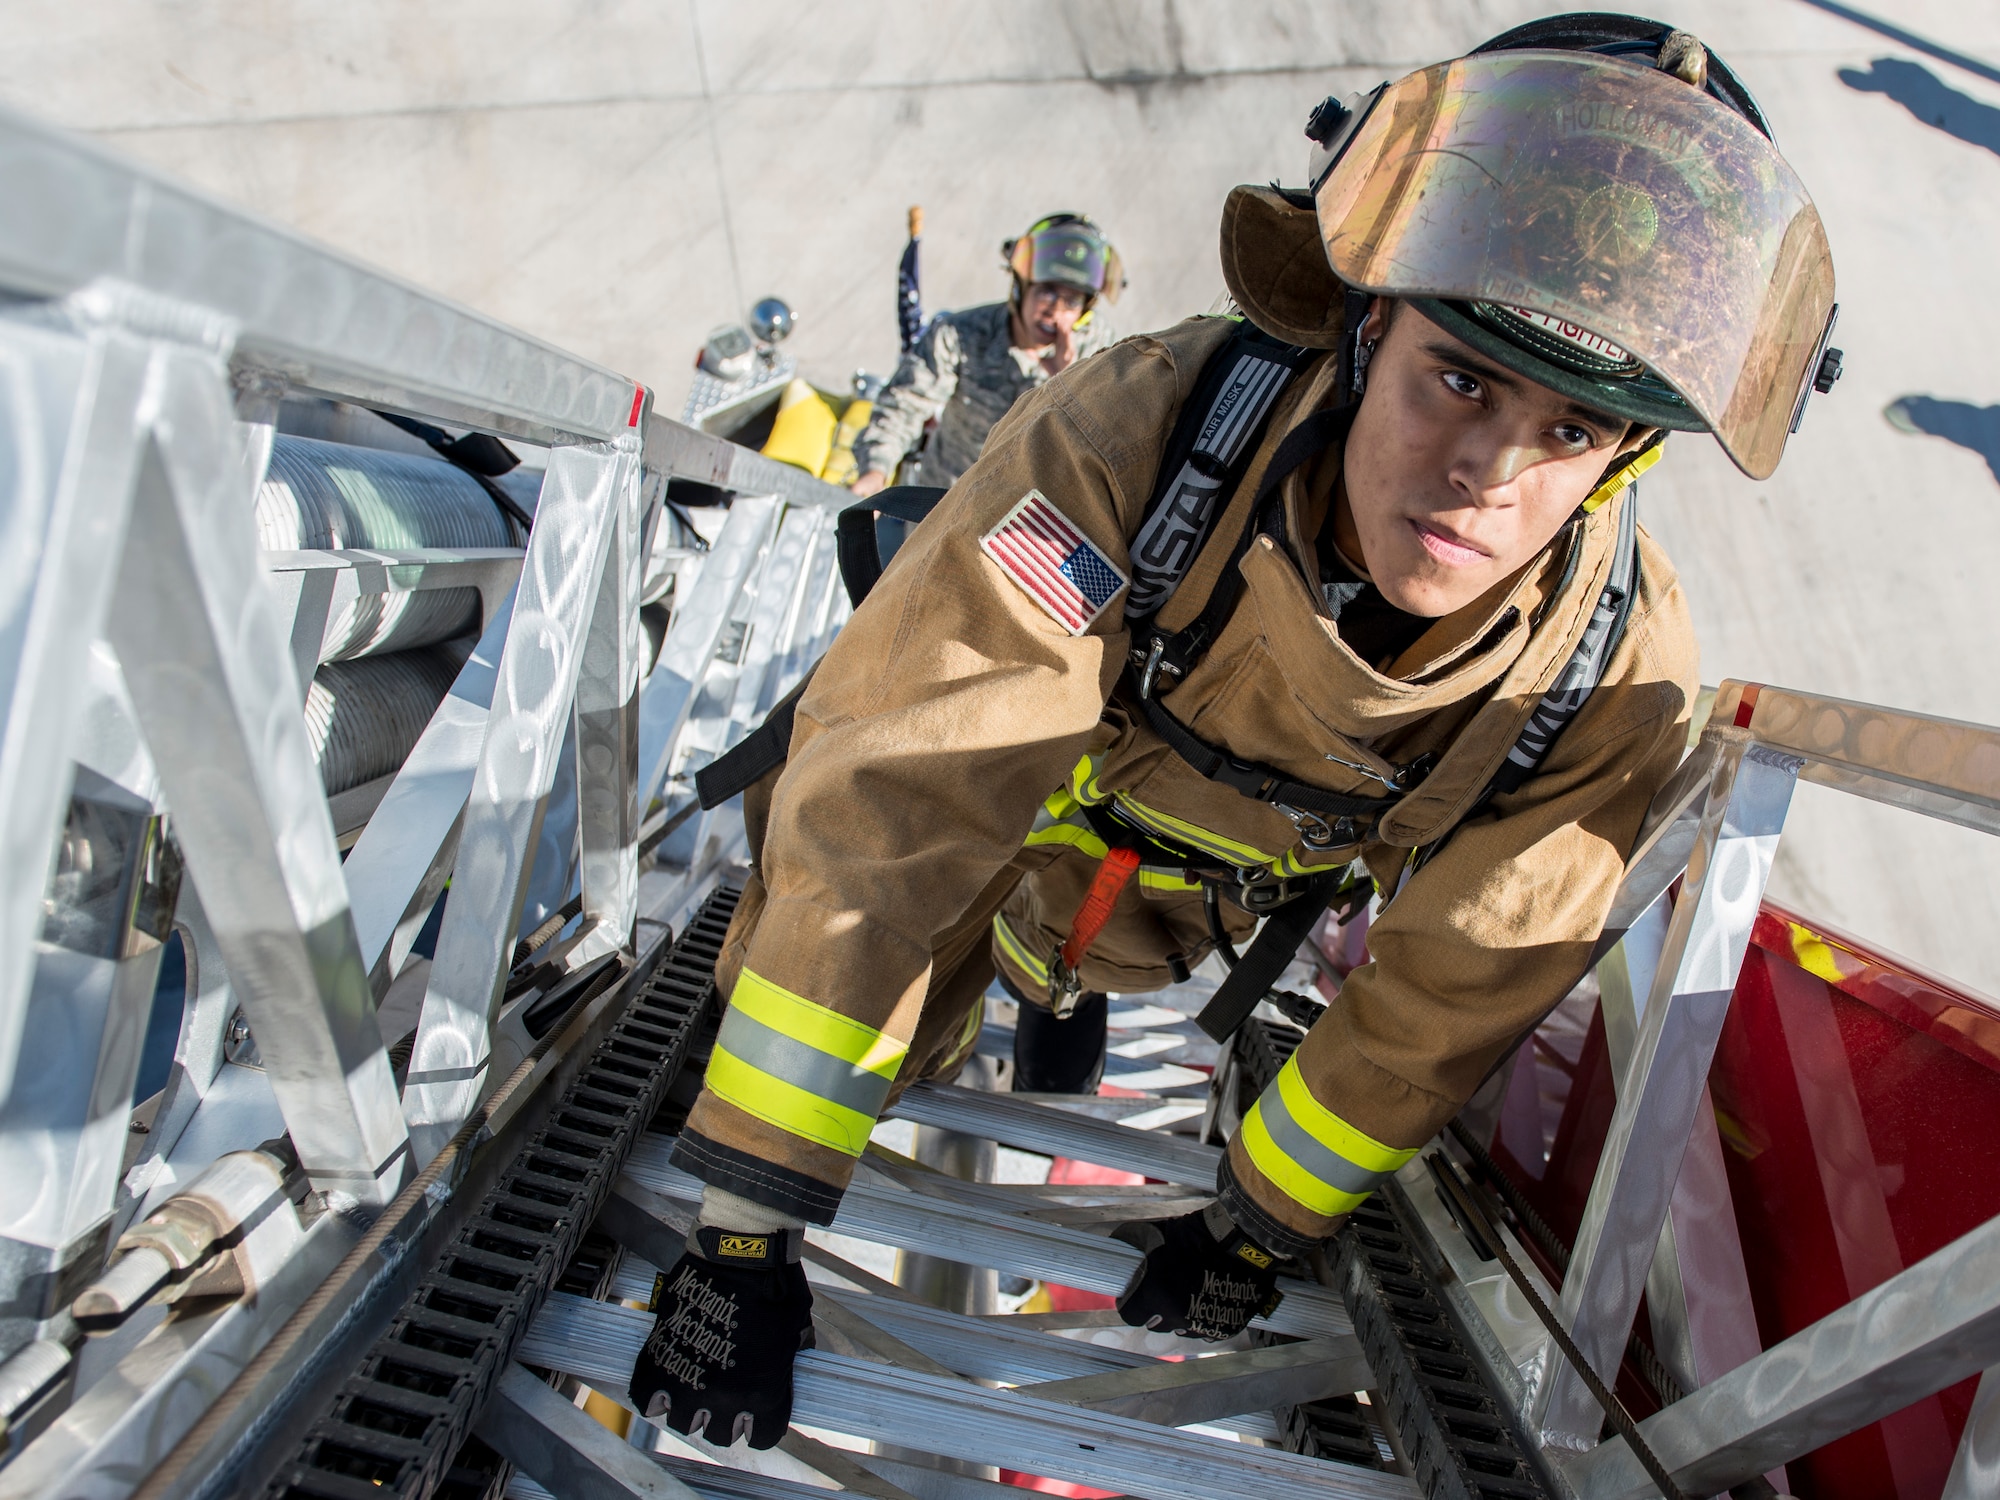 Airman 1st Class Justin Medina, a 49th Civil Engineer Squadron fire protection specialist, climbs an aerial ladder on a fire truck during an exercise Feb. 9, at Holloman Air Force Base, N.M. These Airmen firefighters are the first to respond to fire, bio-hazardous and chemical crises. (U.S. Air Force photo by Airman 1st Class Randahl J. Jenson)